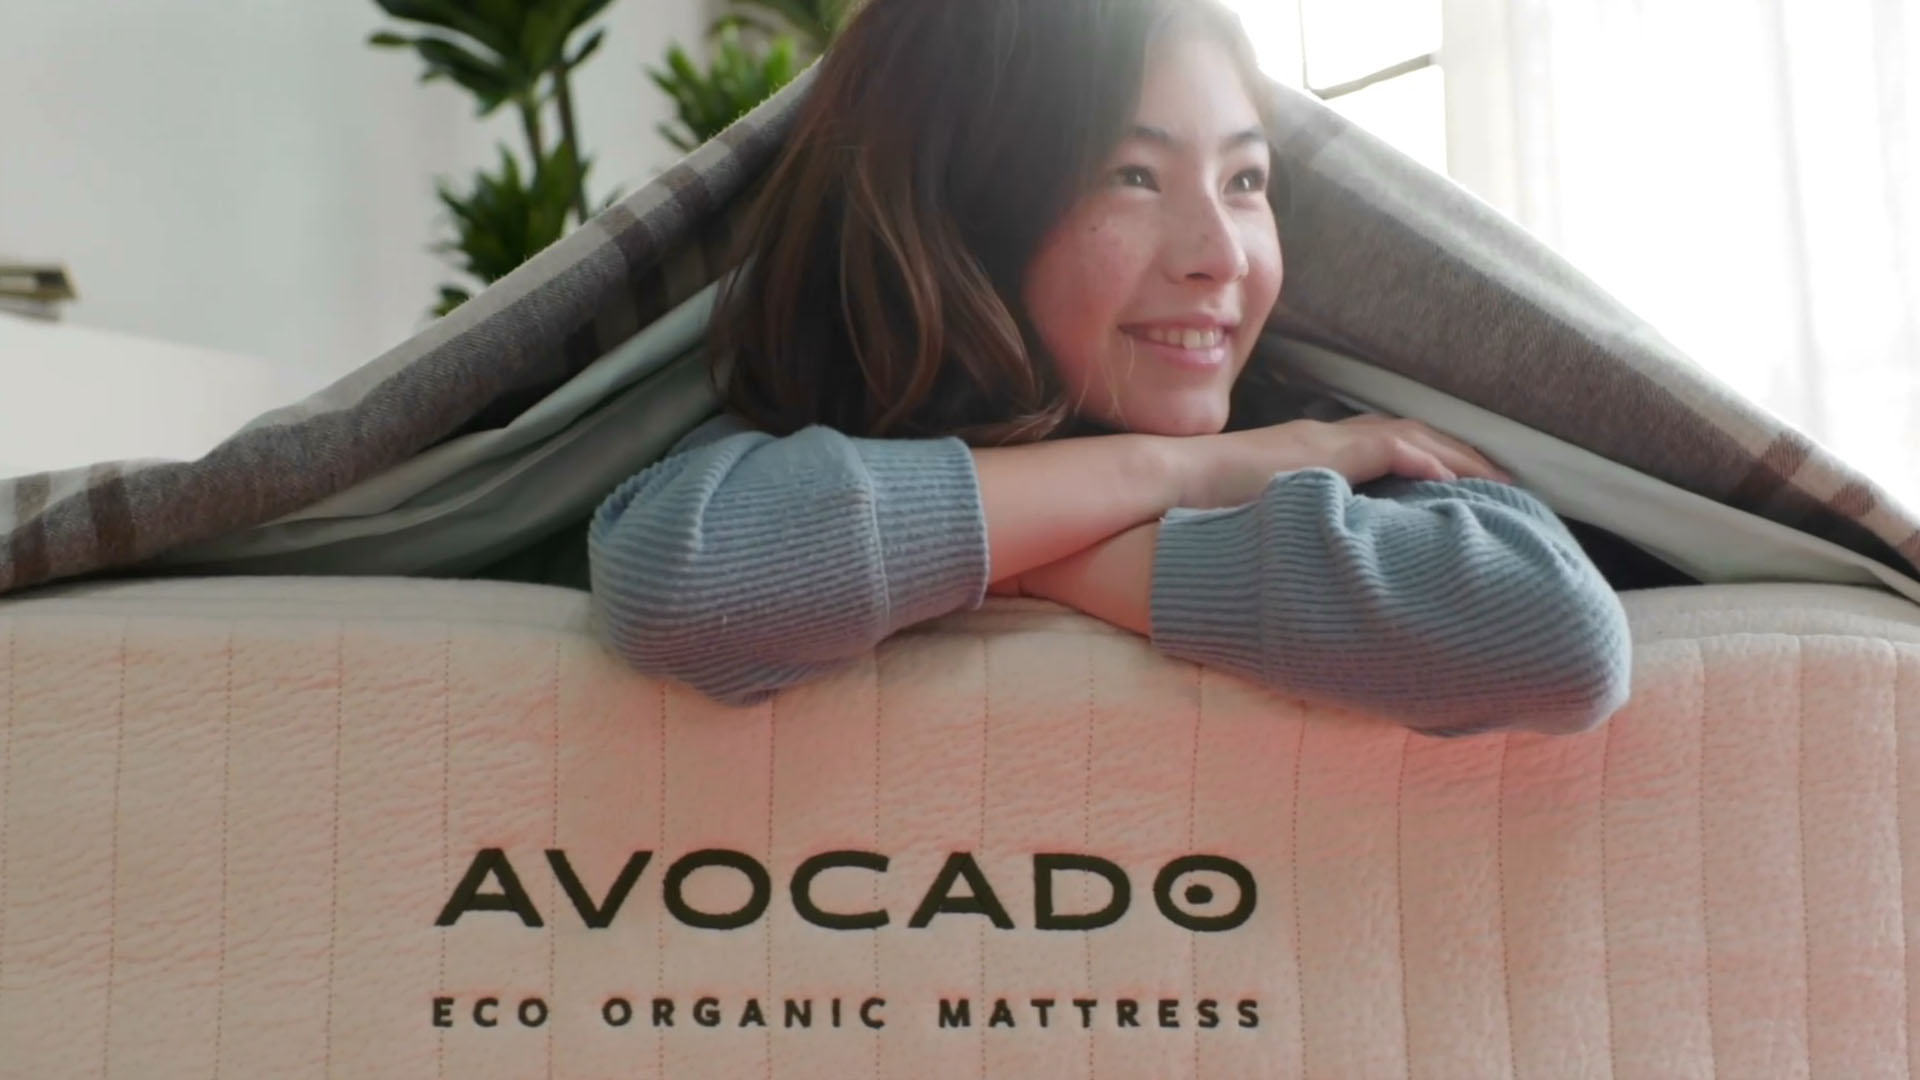 Who sells Avocado mattress near me in Eau Claire